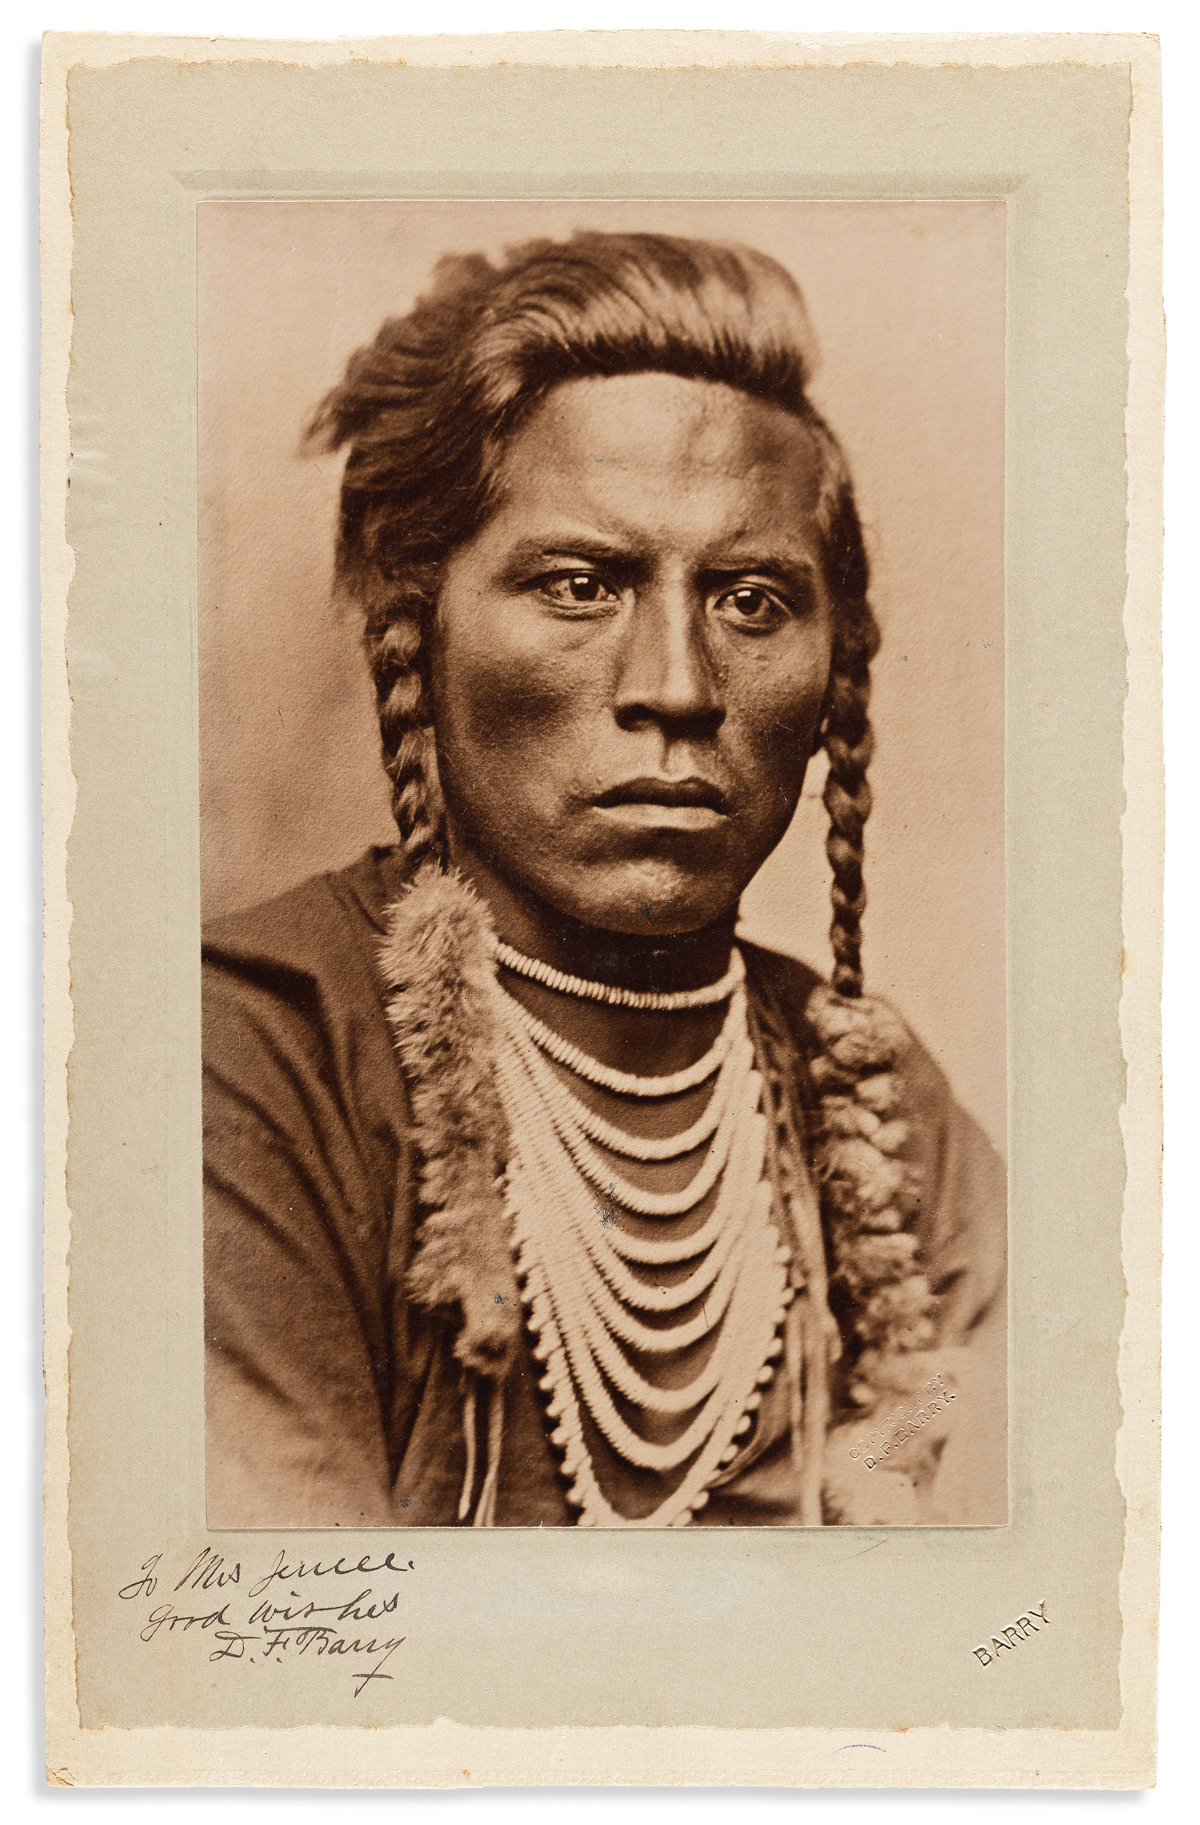 (AMERICAN INDIANS--PHOTOGRAPHS.) David F. Barry. Photograph of Curley.